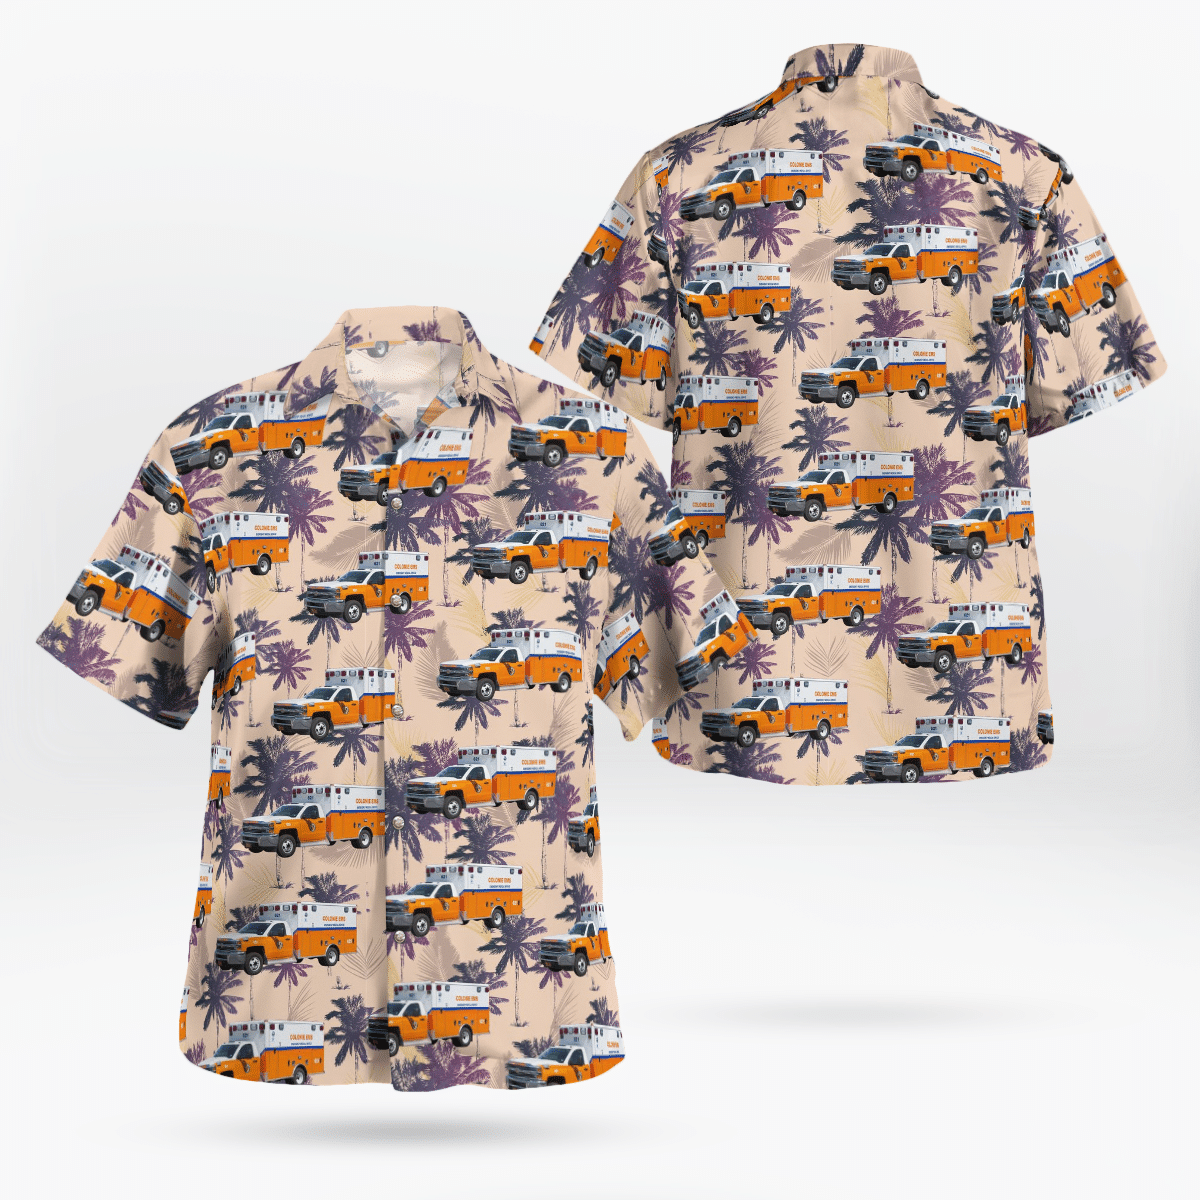 If you are in need of a new summertime look, pick up this Hawaiian shirt 165